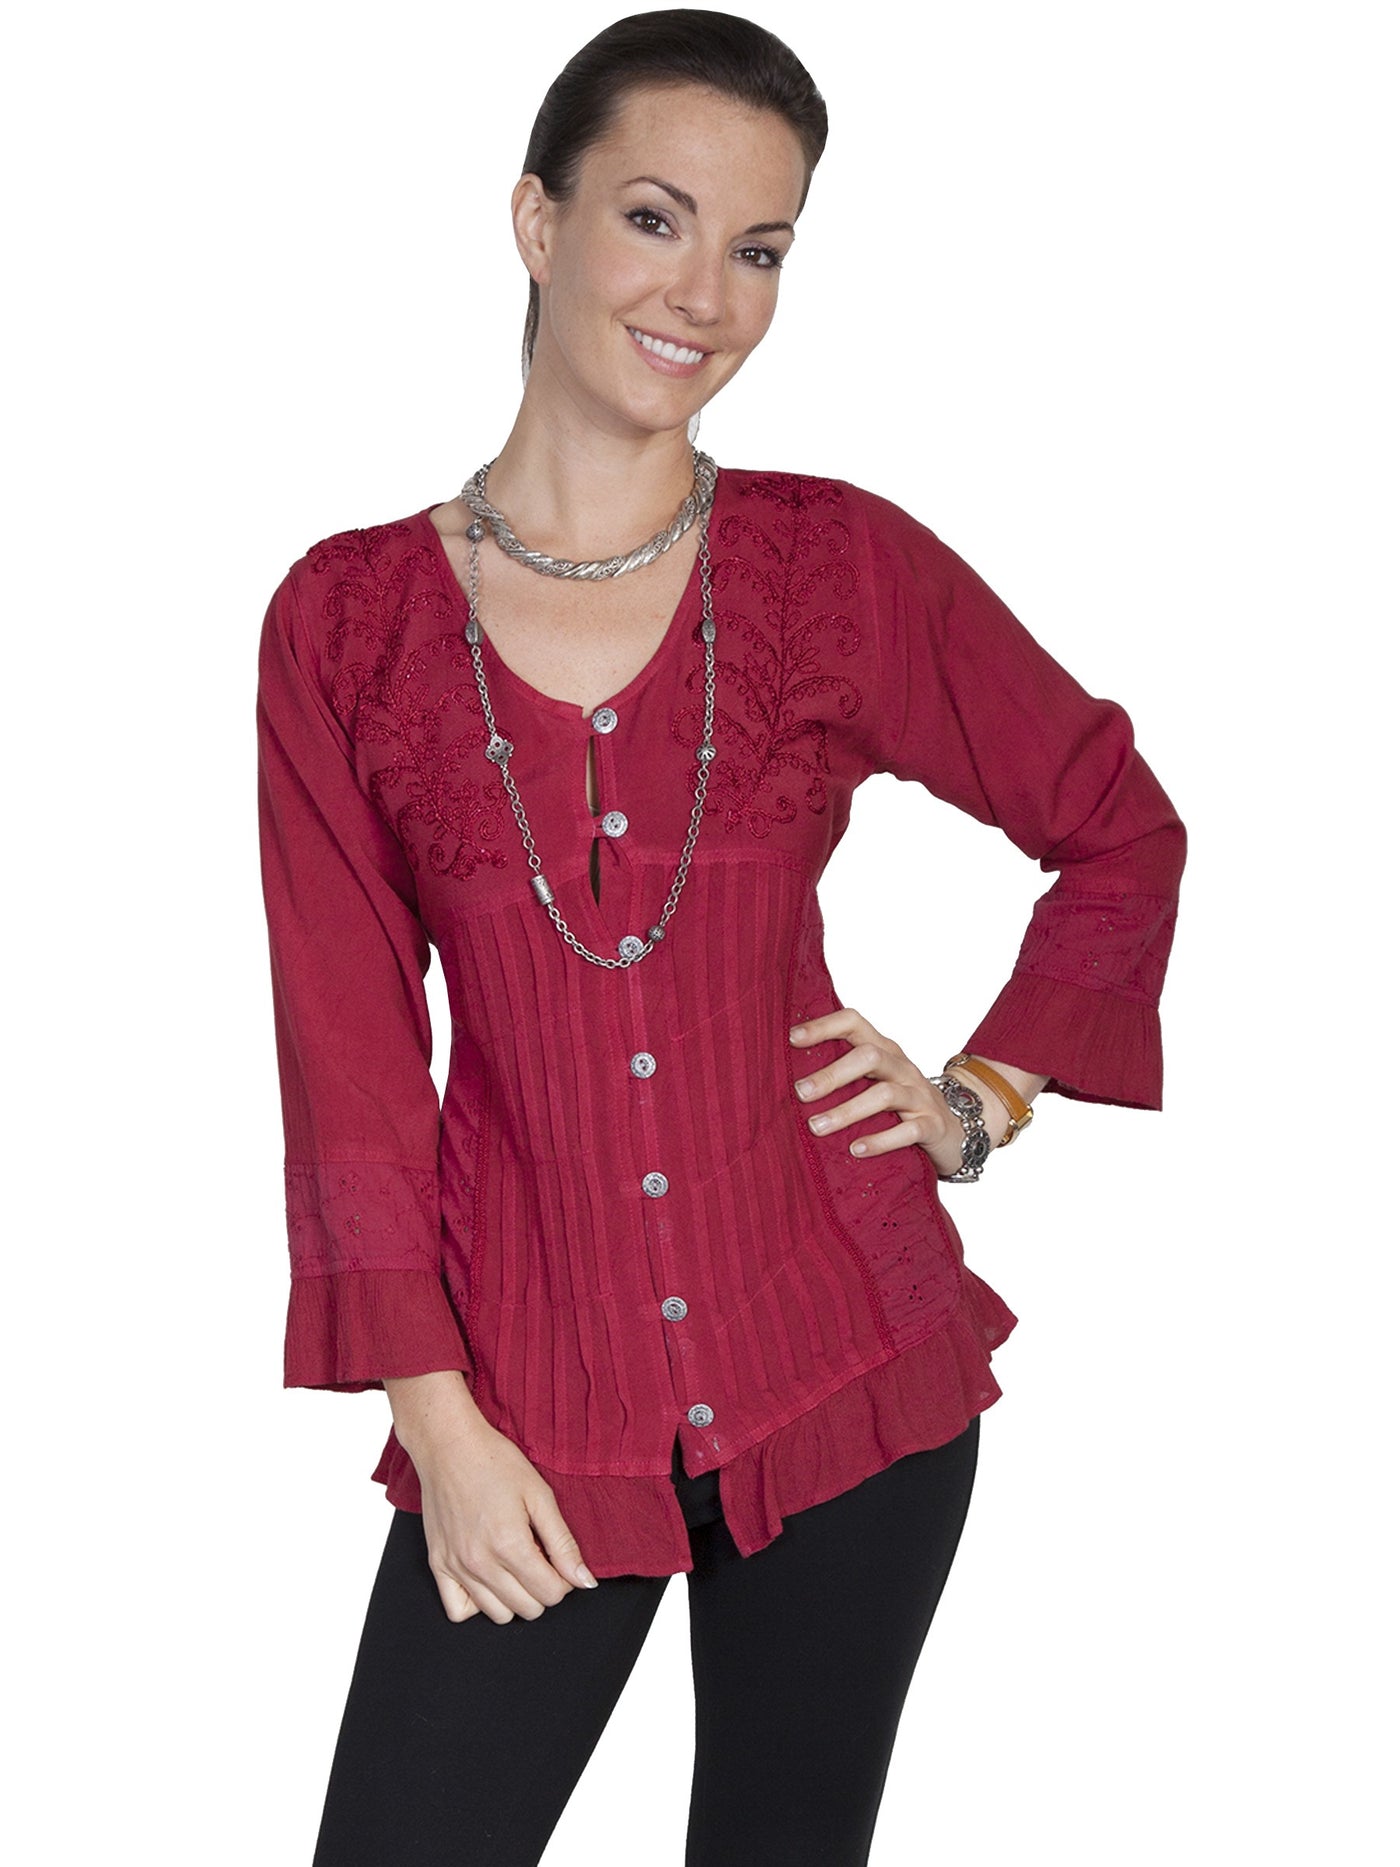 Prairie Ruffled Blouse in Burgundy - SOLD OUT